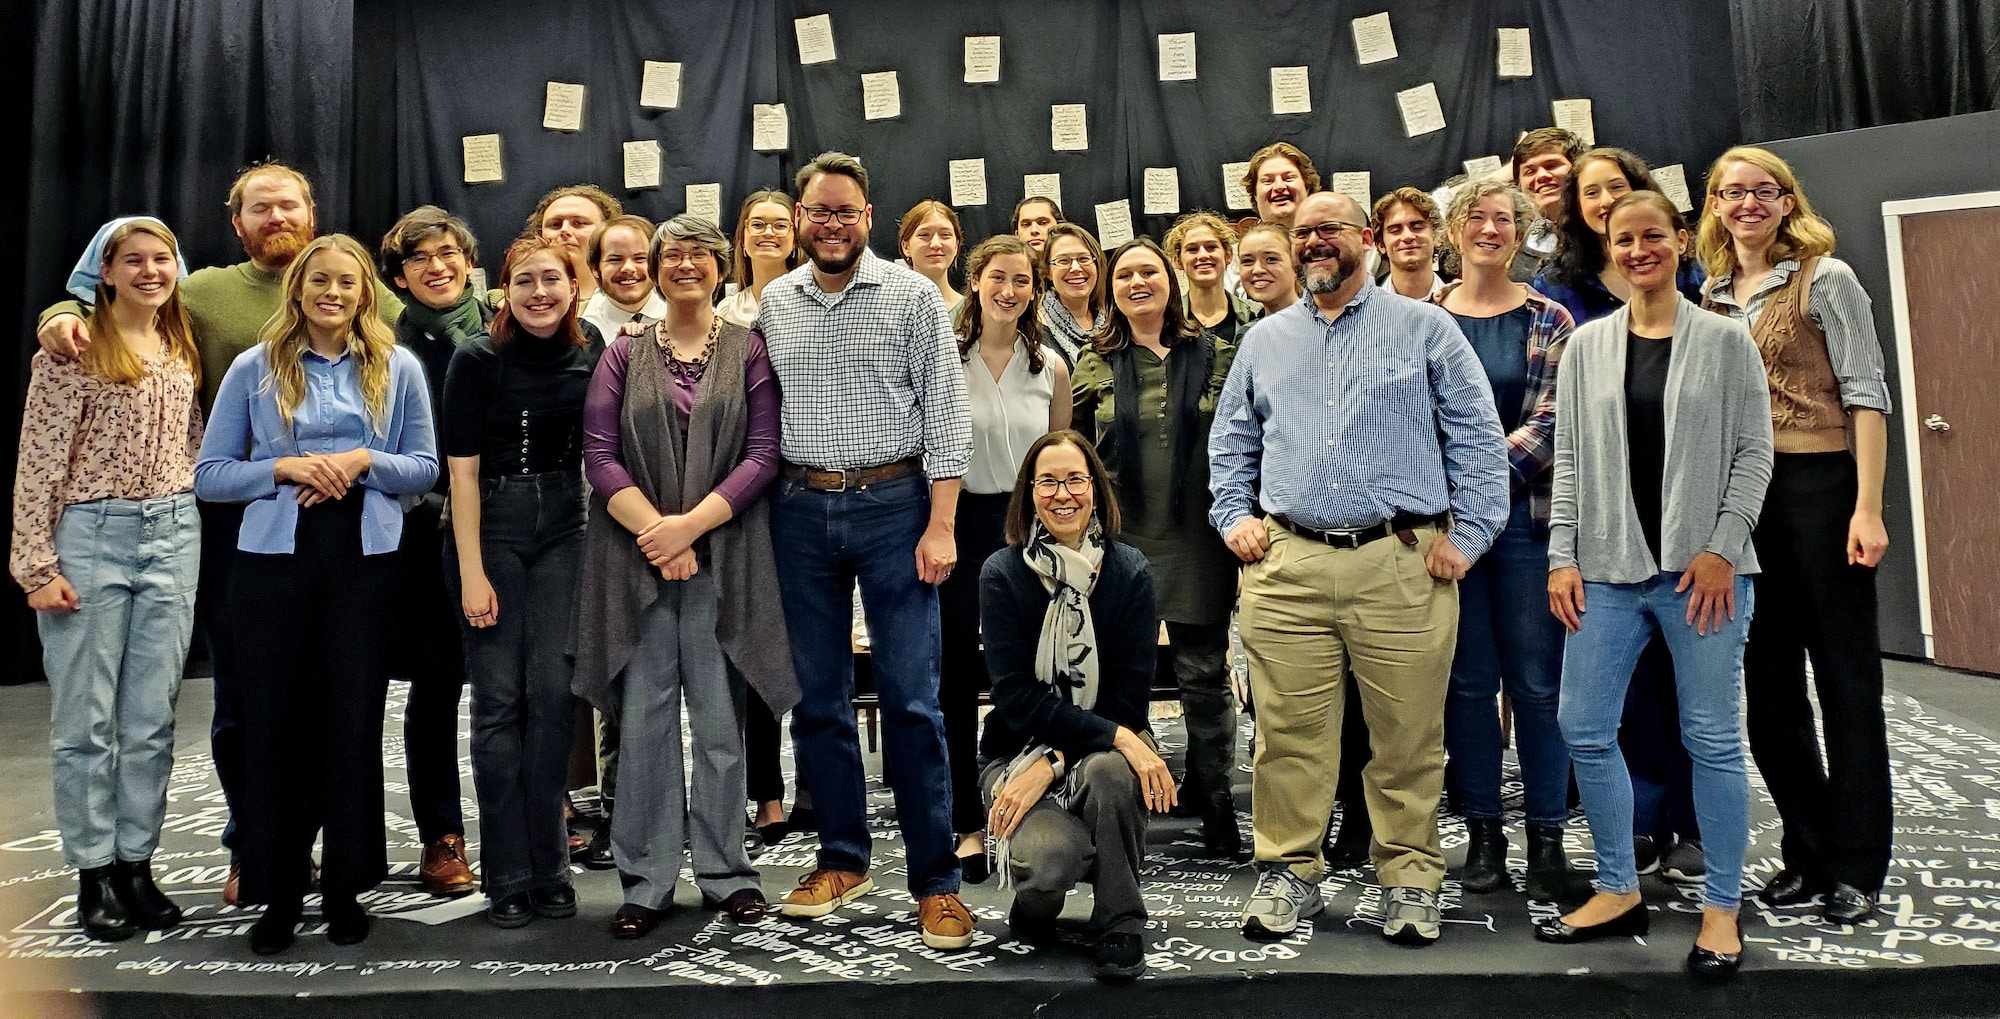 Director Dr. Monica Anderson and the full cast with the five alumni who returned to see the reprised show: Brendan ’01 and Cat (Egan ’01) Hodge, Christina LaRosa ’04, Lisa Chmielecki Millin ’01, and Dr. Kevin Graves ’01.